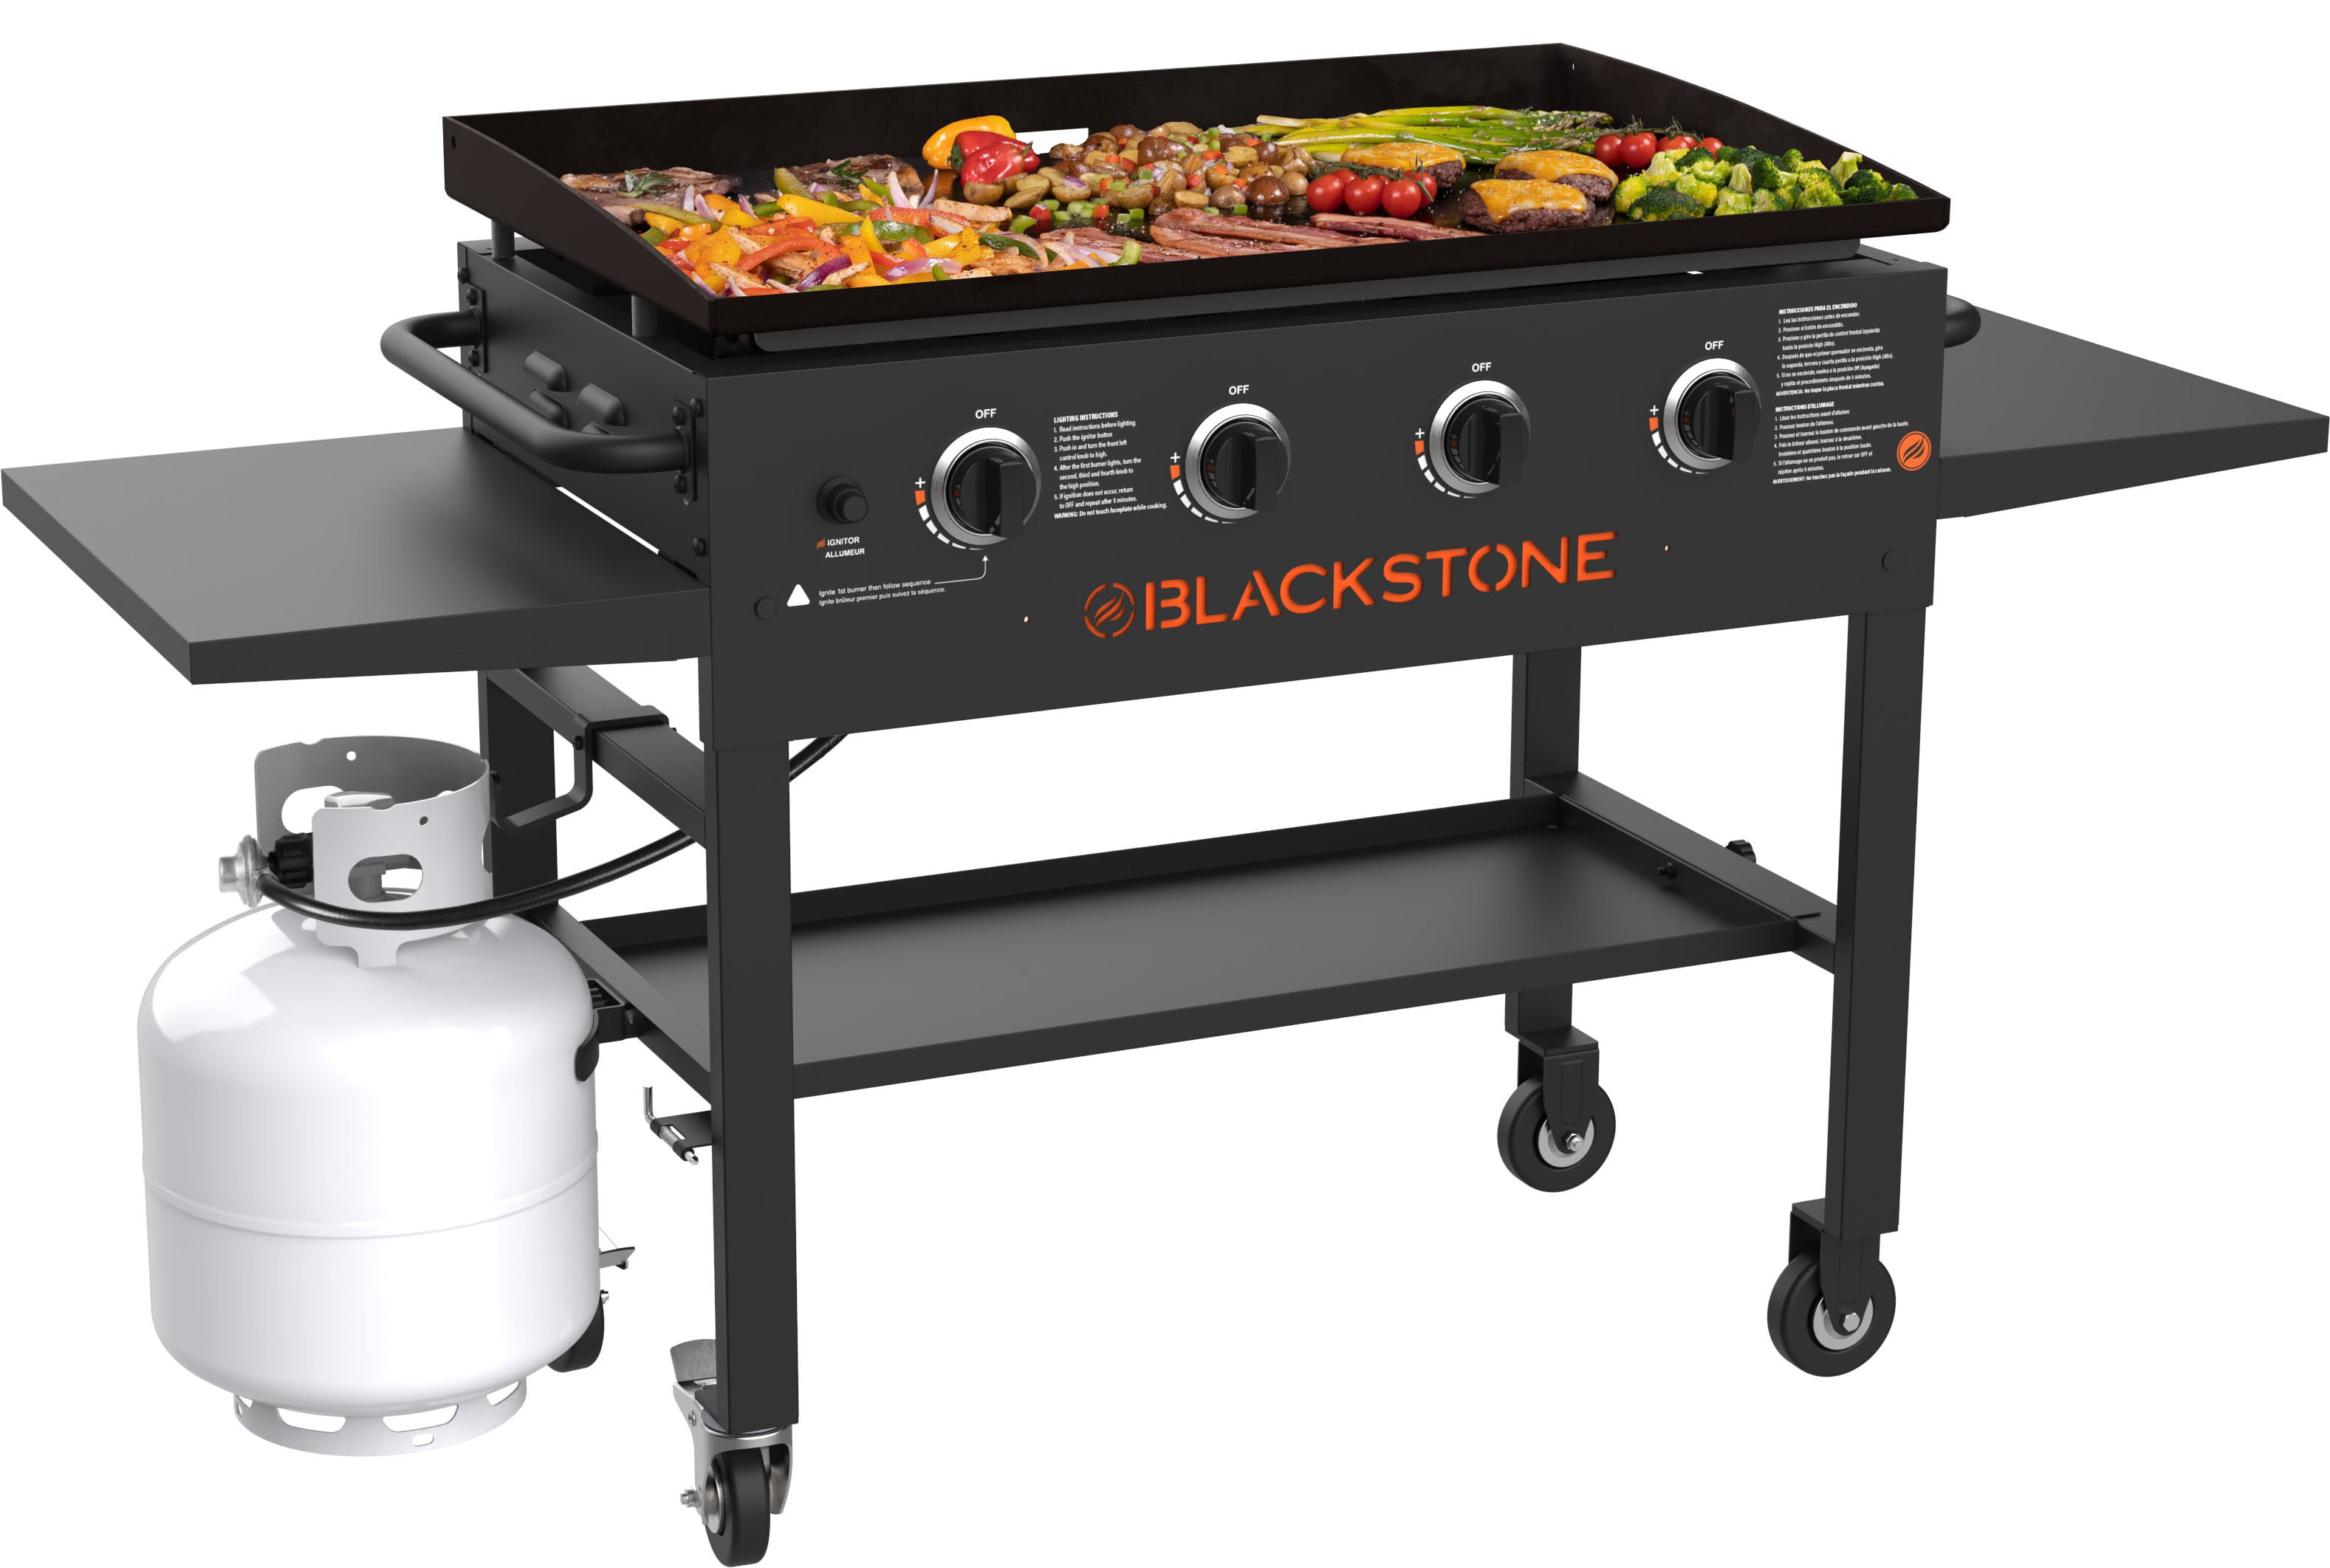 36 Inch Blackstone 1825 36 Accessory Griddle with Side Shelf Black 36 inch-4 Burner-W/New & 5004 Griddle Grill 36 Hard Cover 